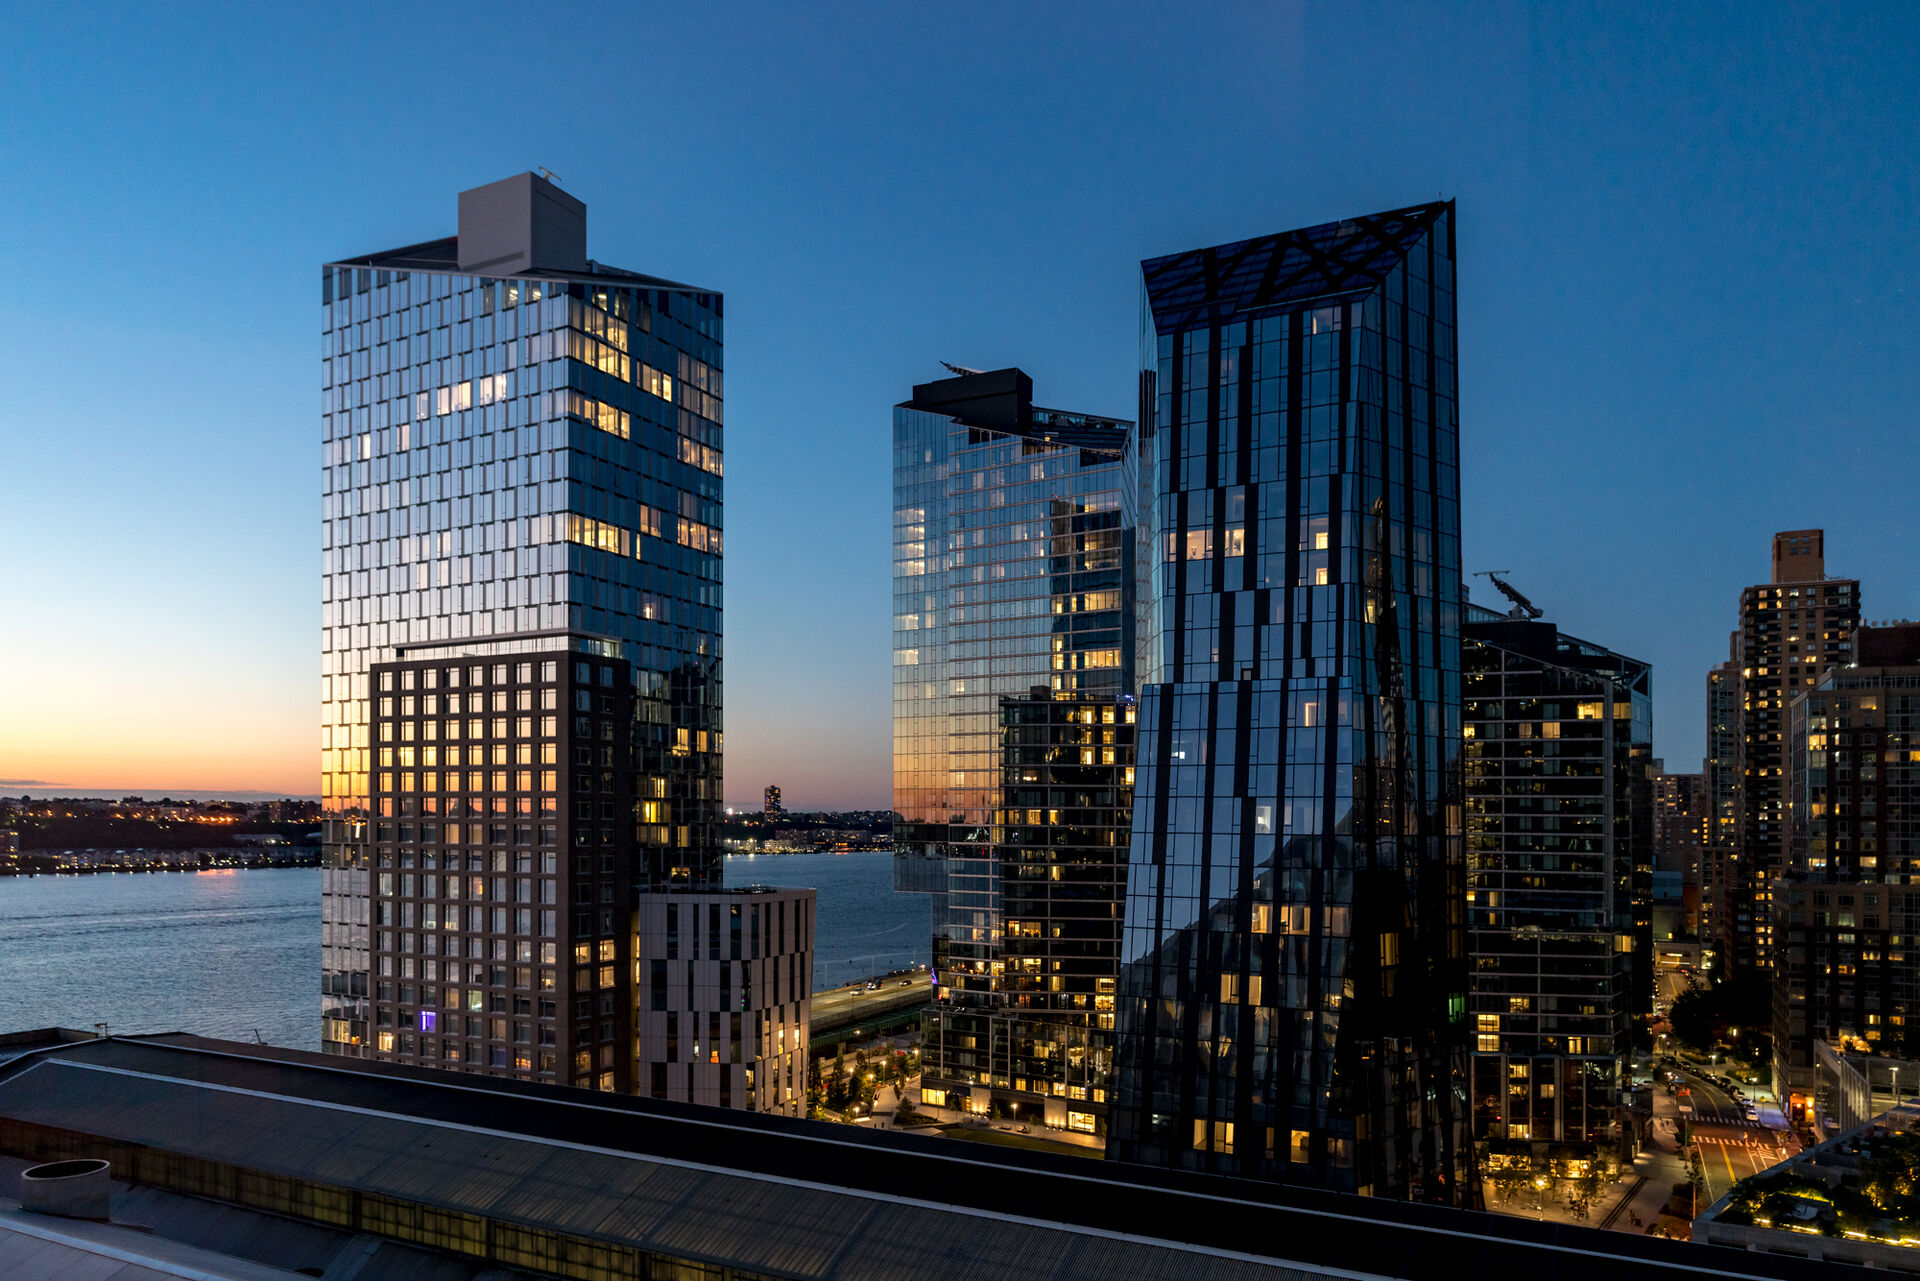 Modern skyscrapers dominate the cityscape against the backdrop of a twilight sky, with indoor lights beginning to twinkle as evening falls over the urban waterfront.